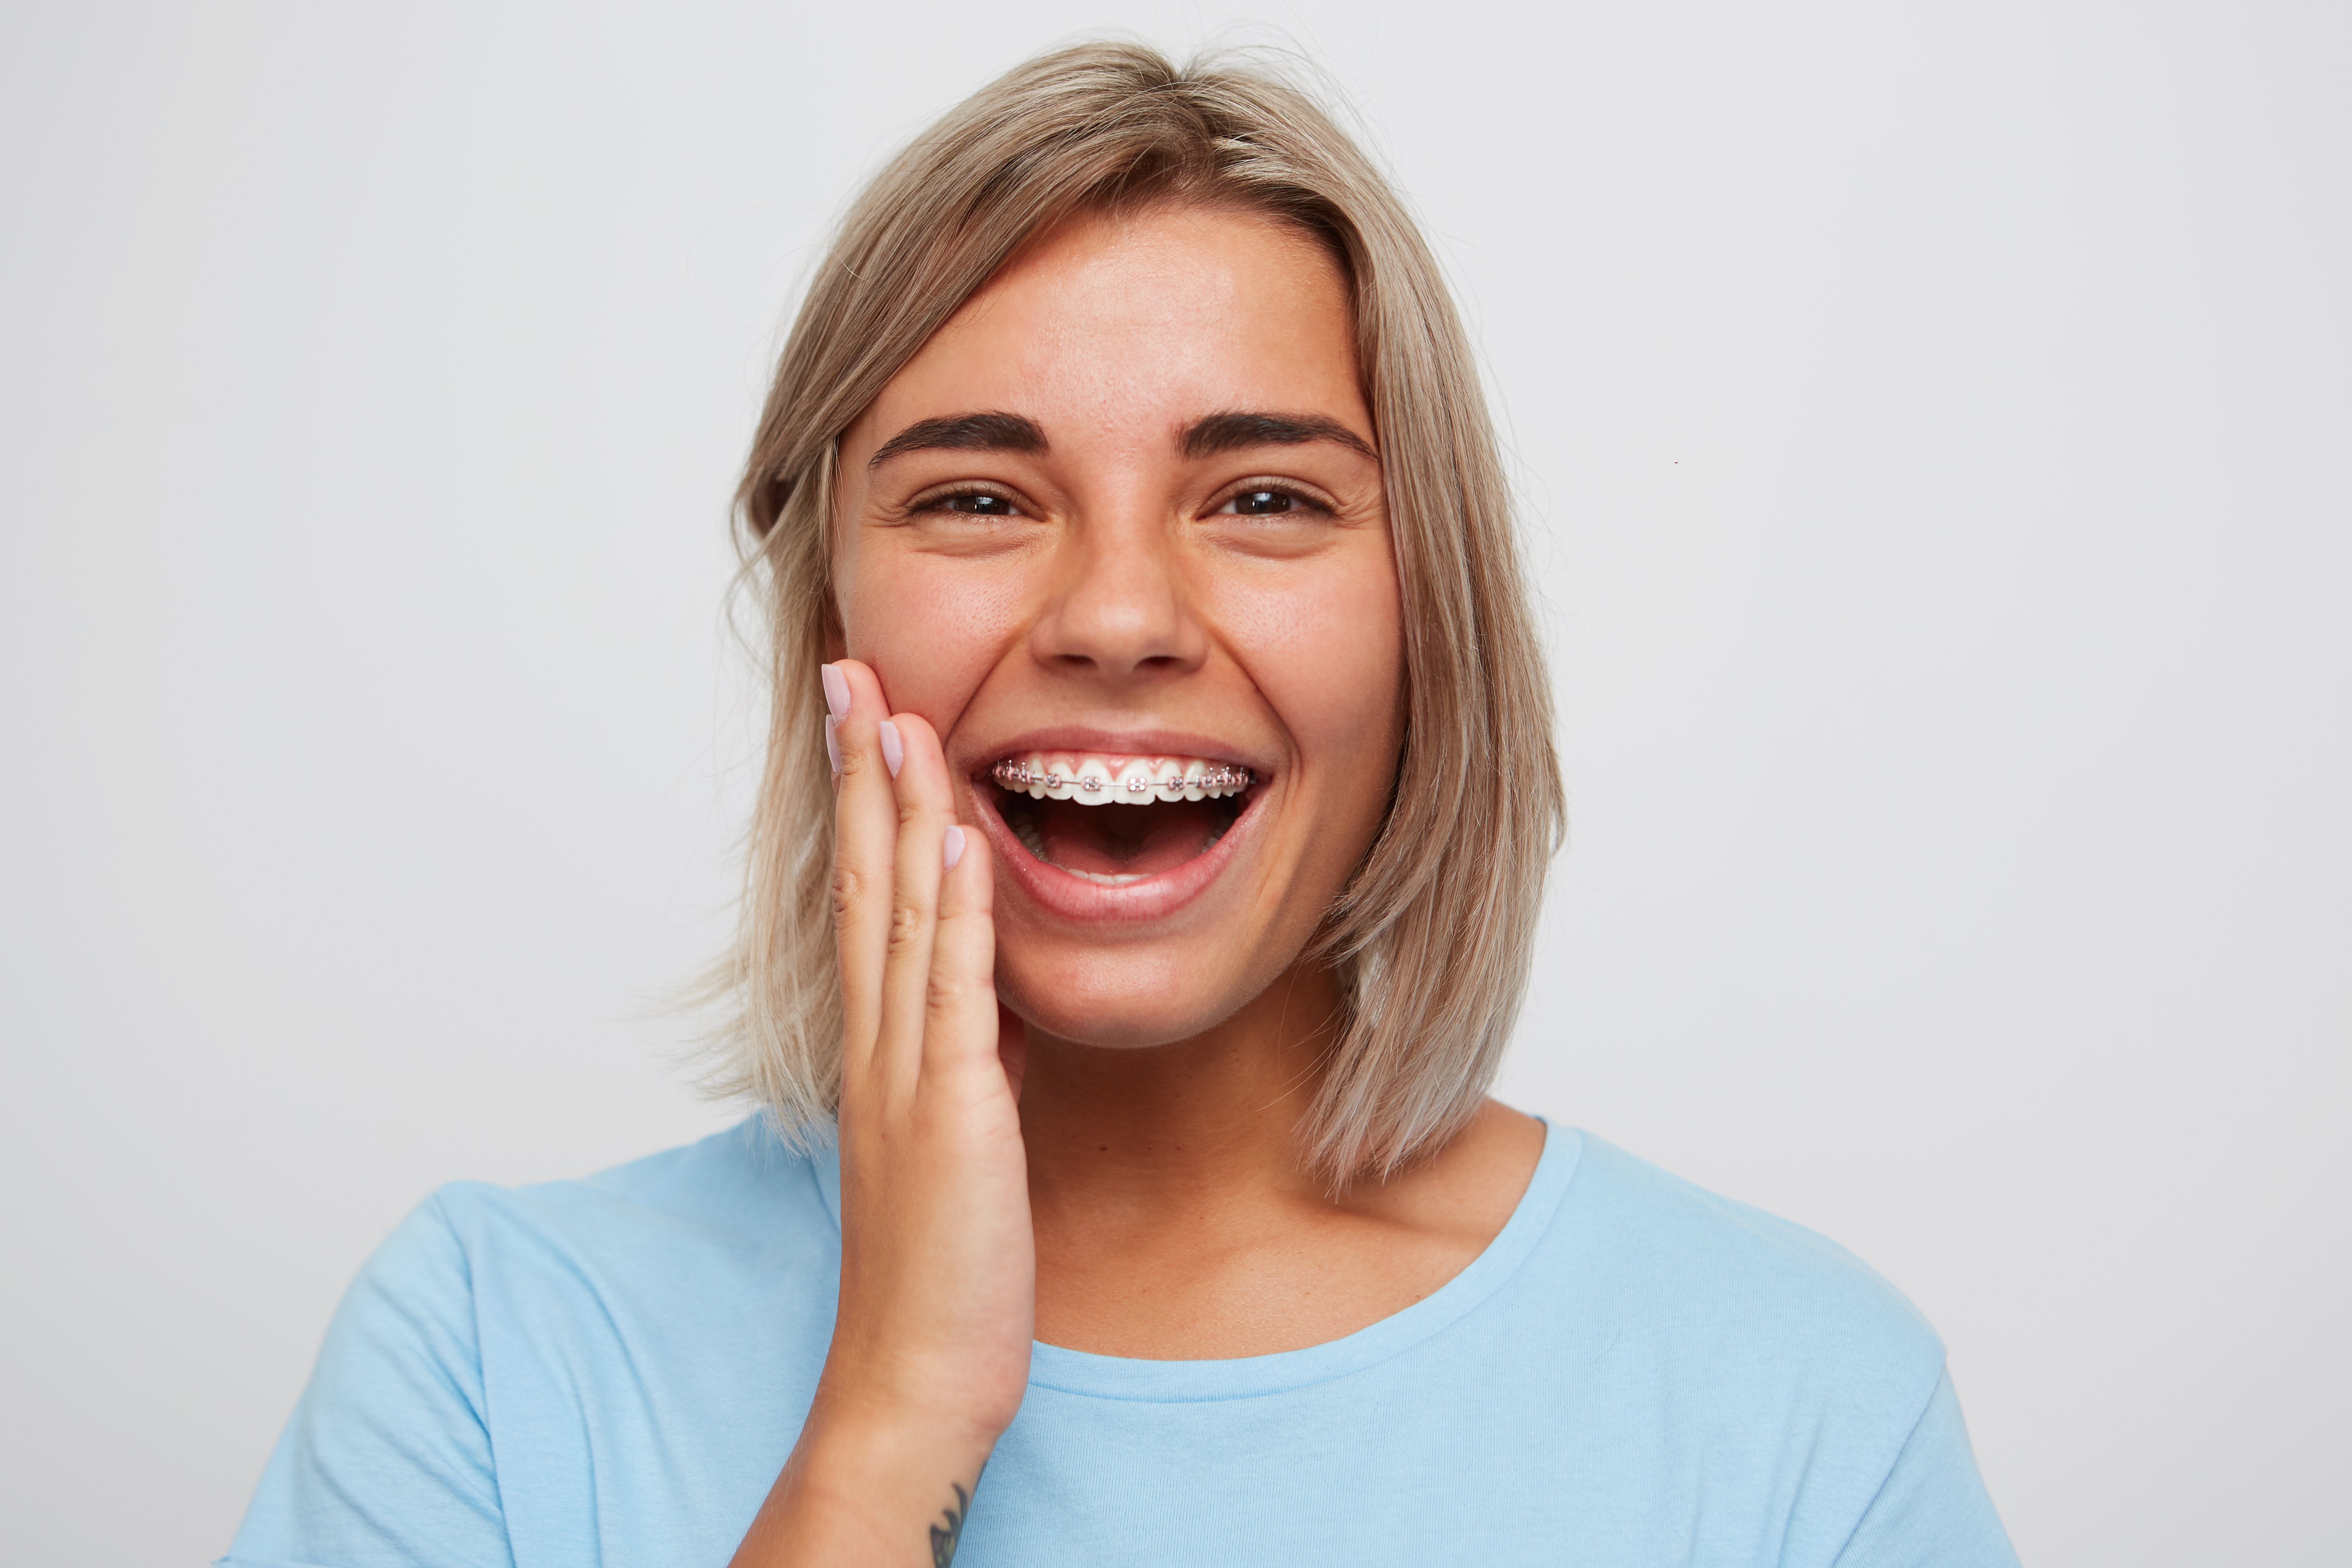 cheerful blonde woman wearing traditional braces